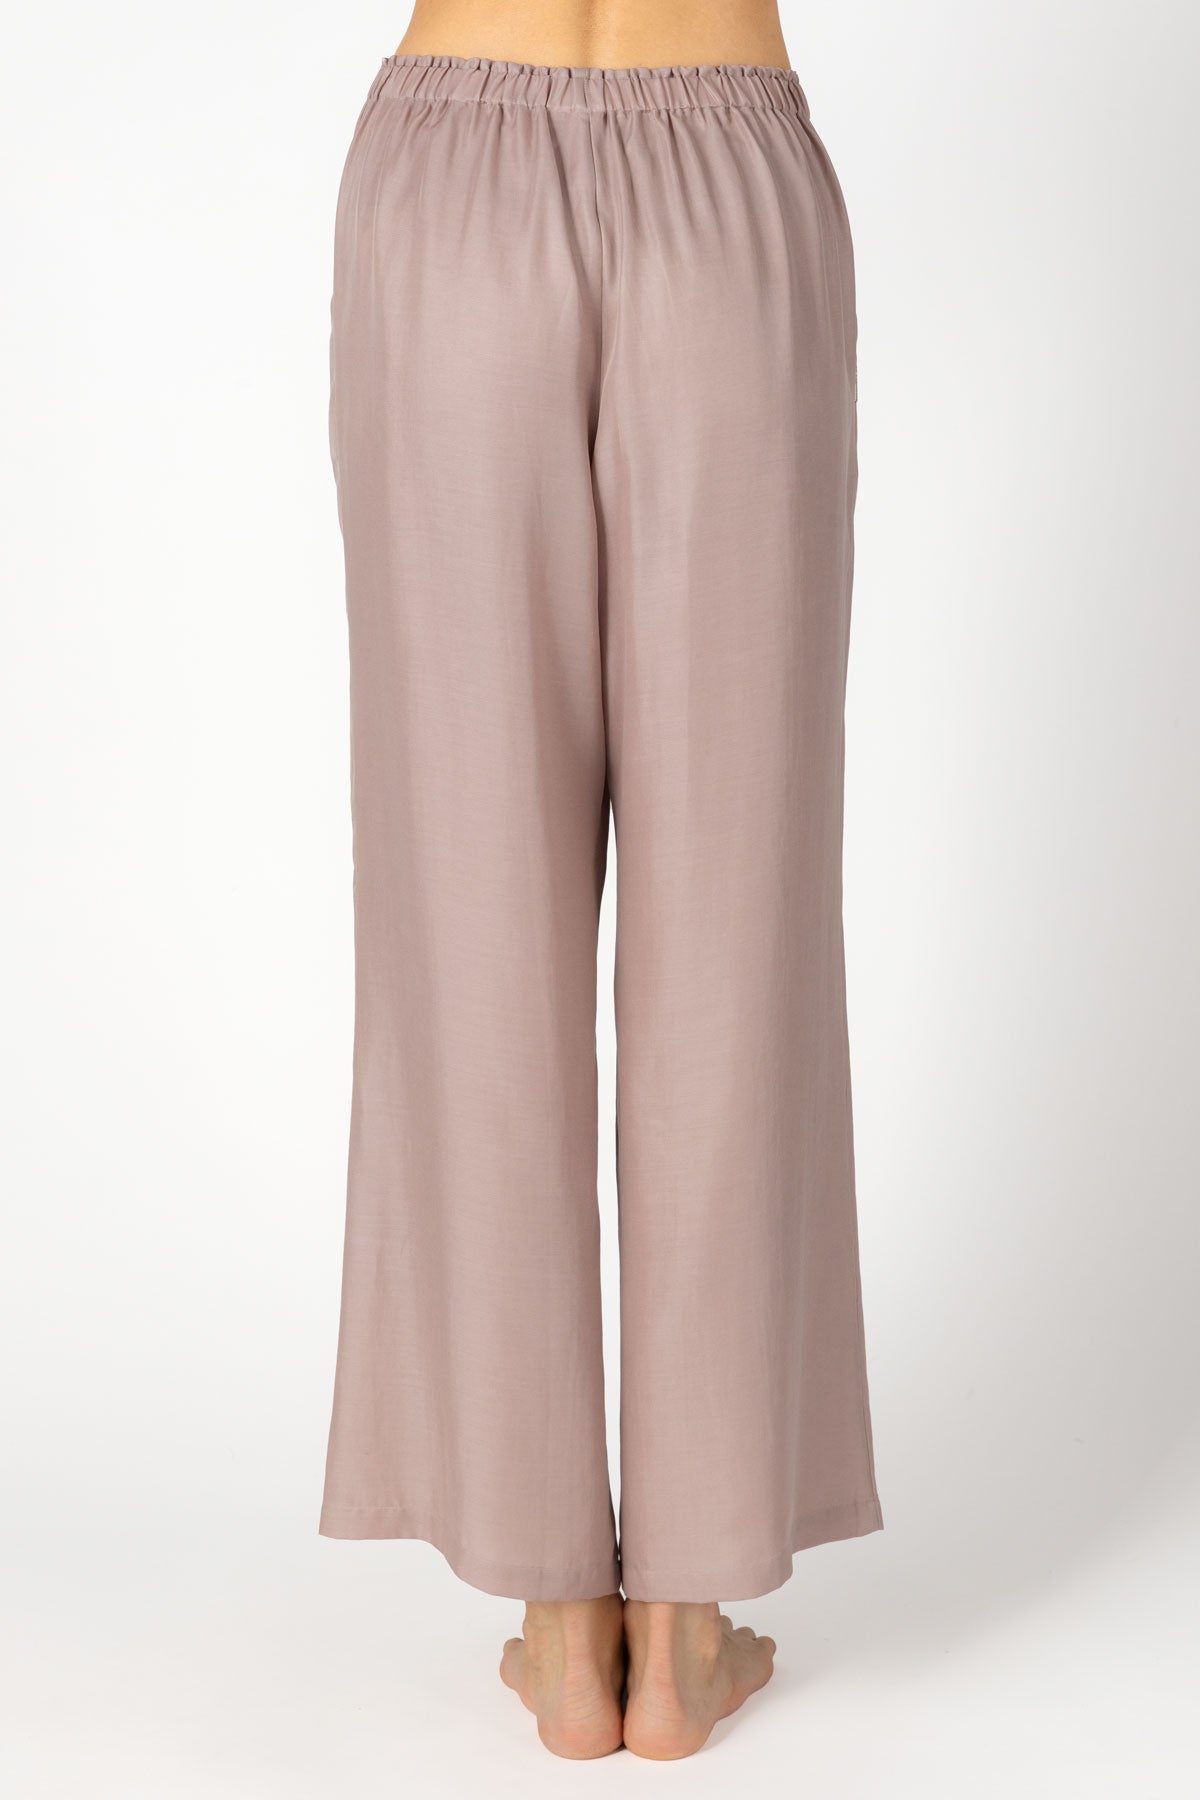 Kacey Paperbag City Pant Lounge Trouser NK iMODE Freckles Pink XS